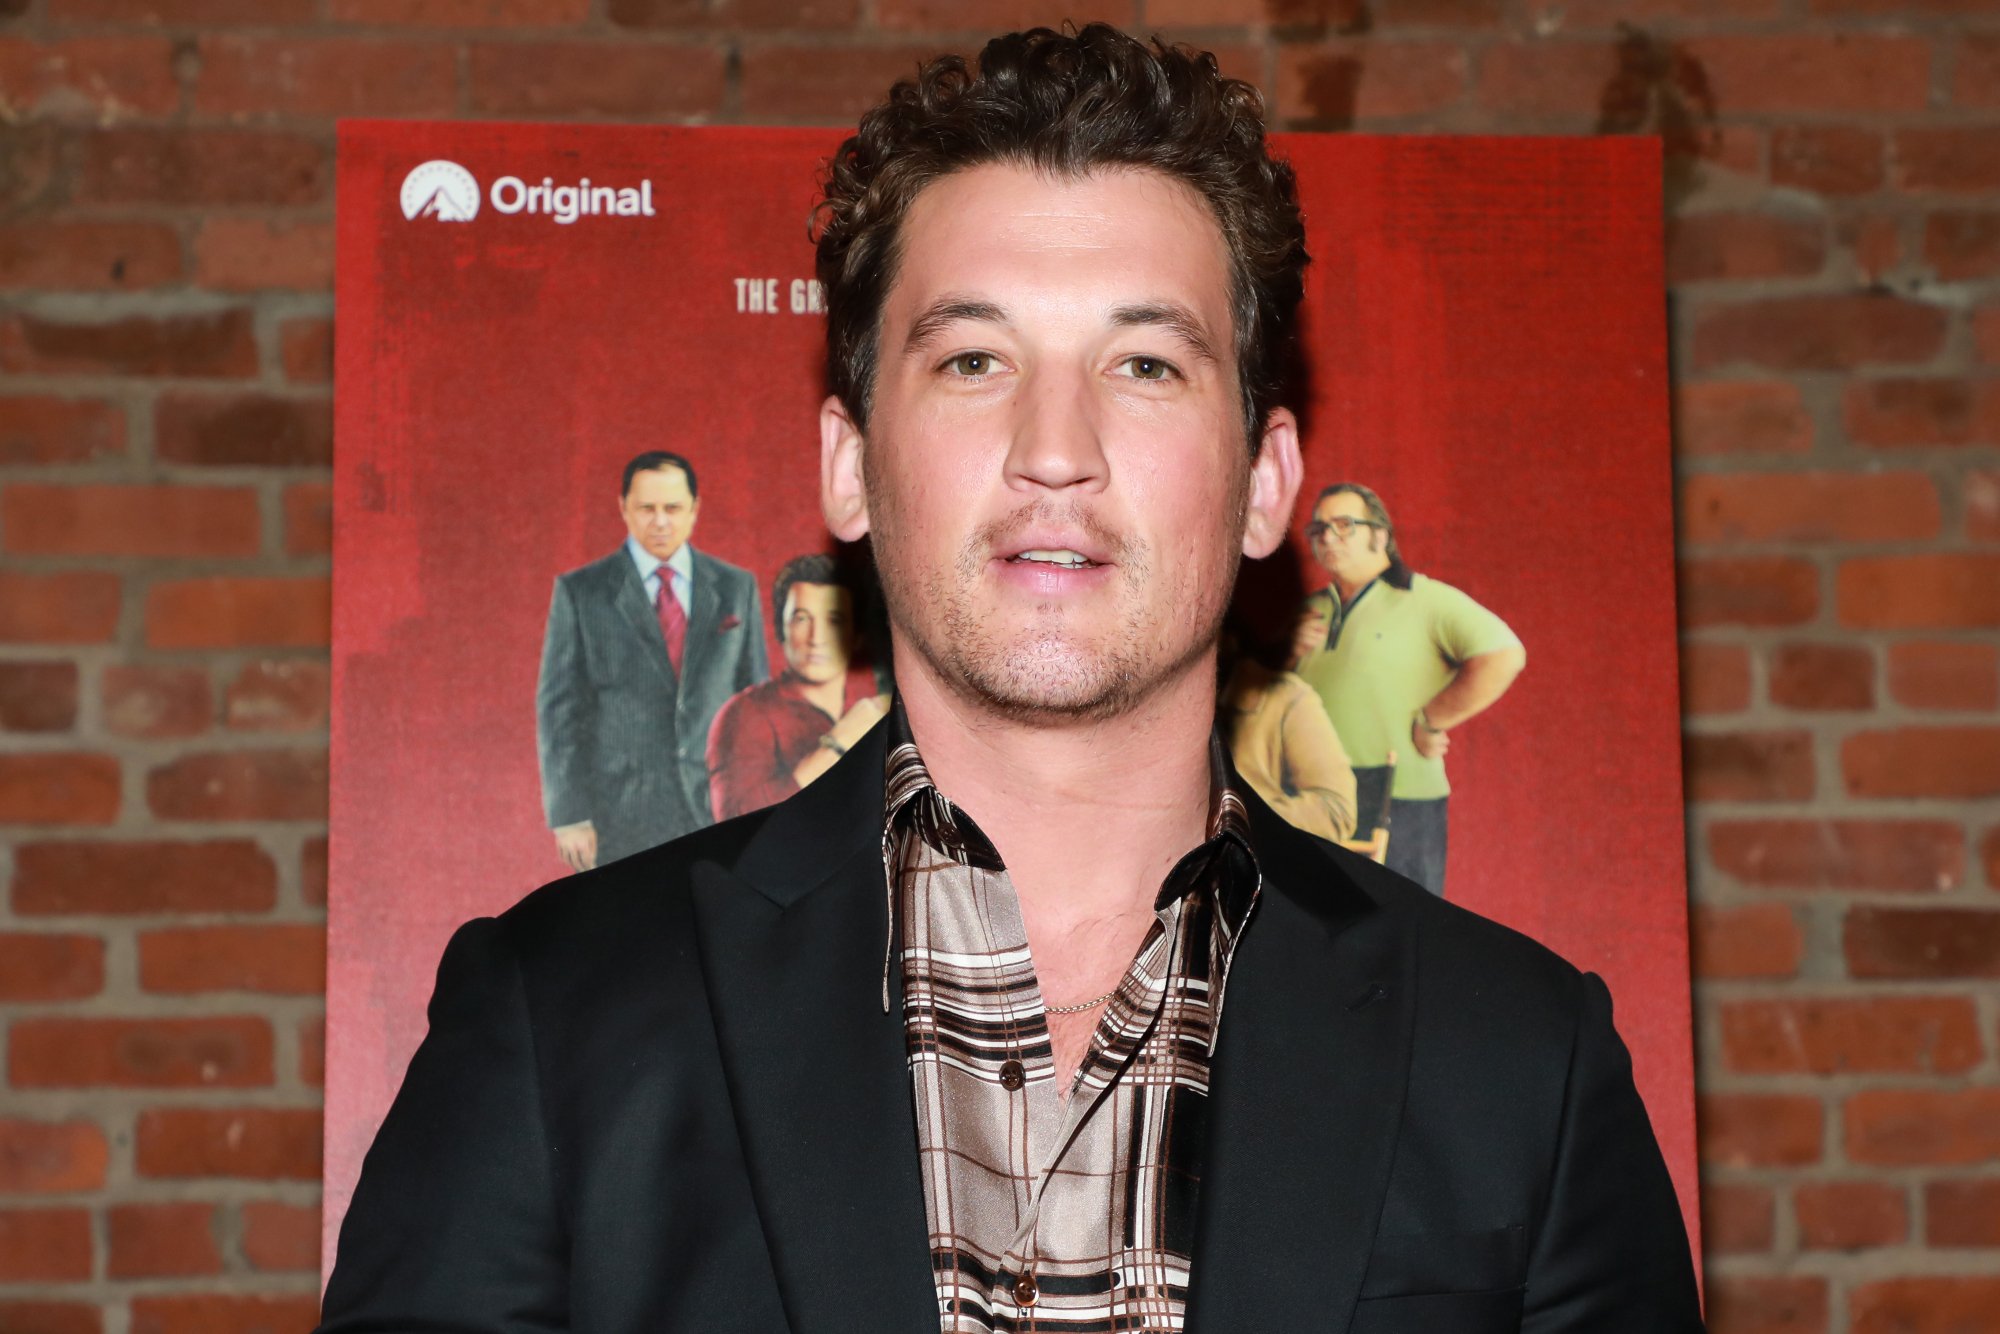 'Top Gun: Maverick' star Miles Teller wearing a suit in front of a poster and a brick wall